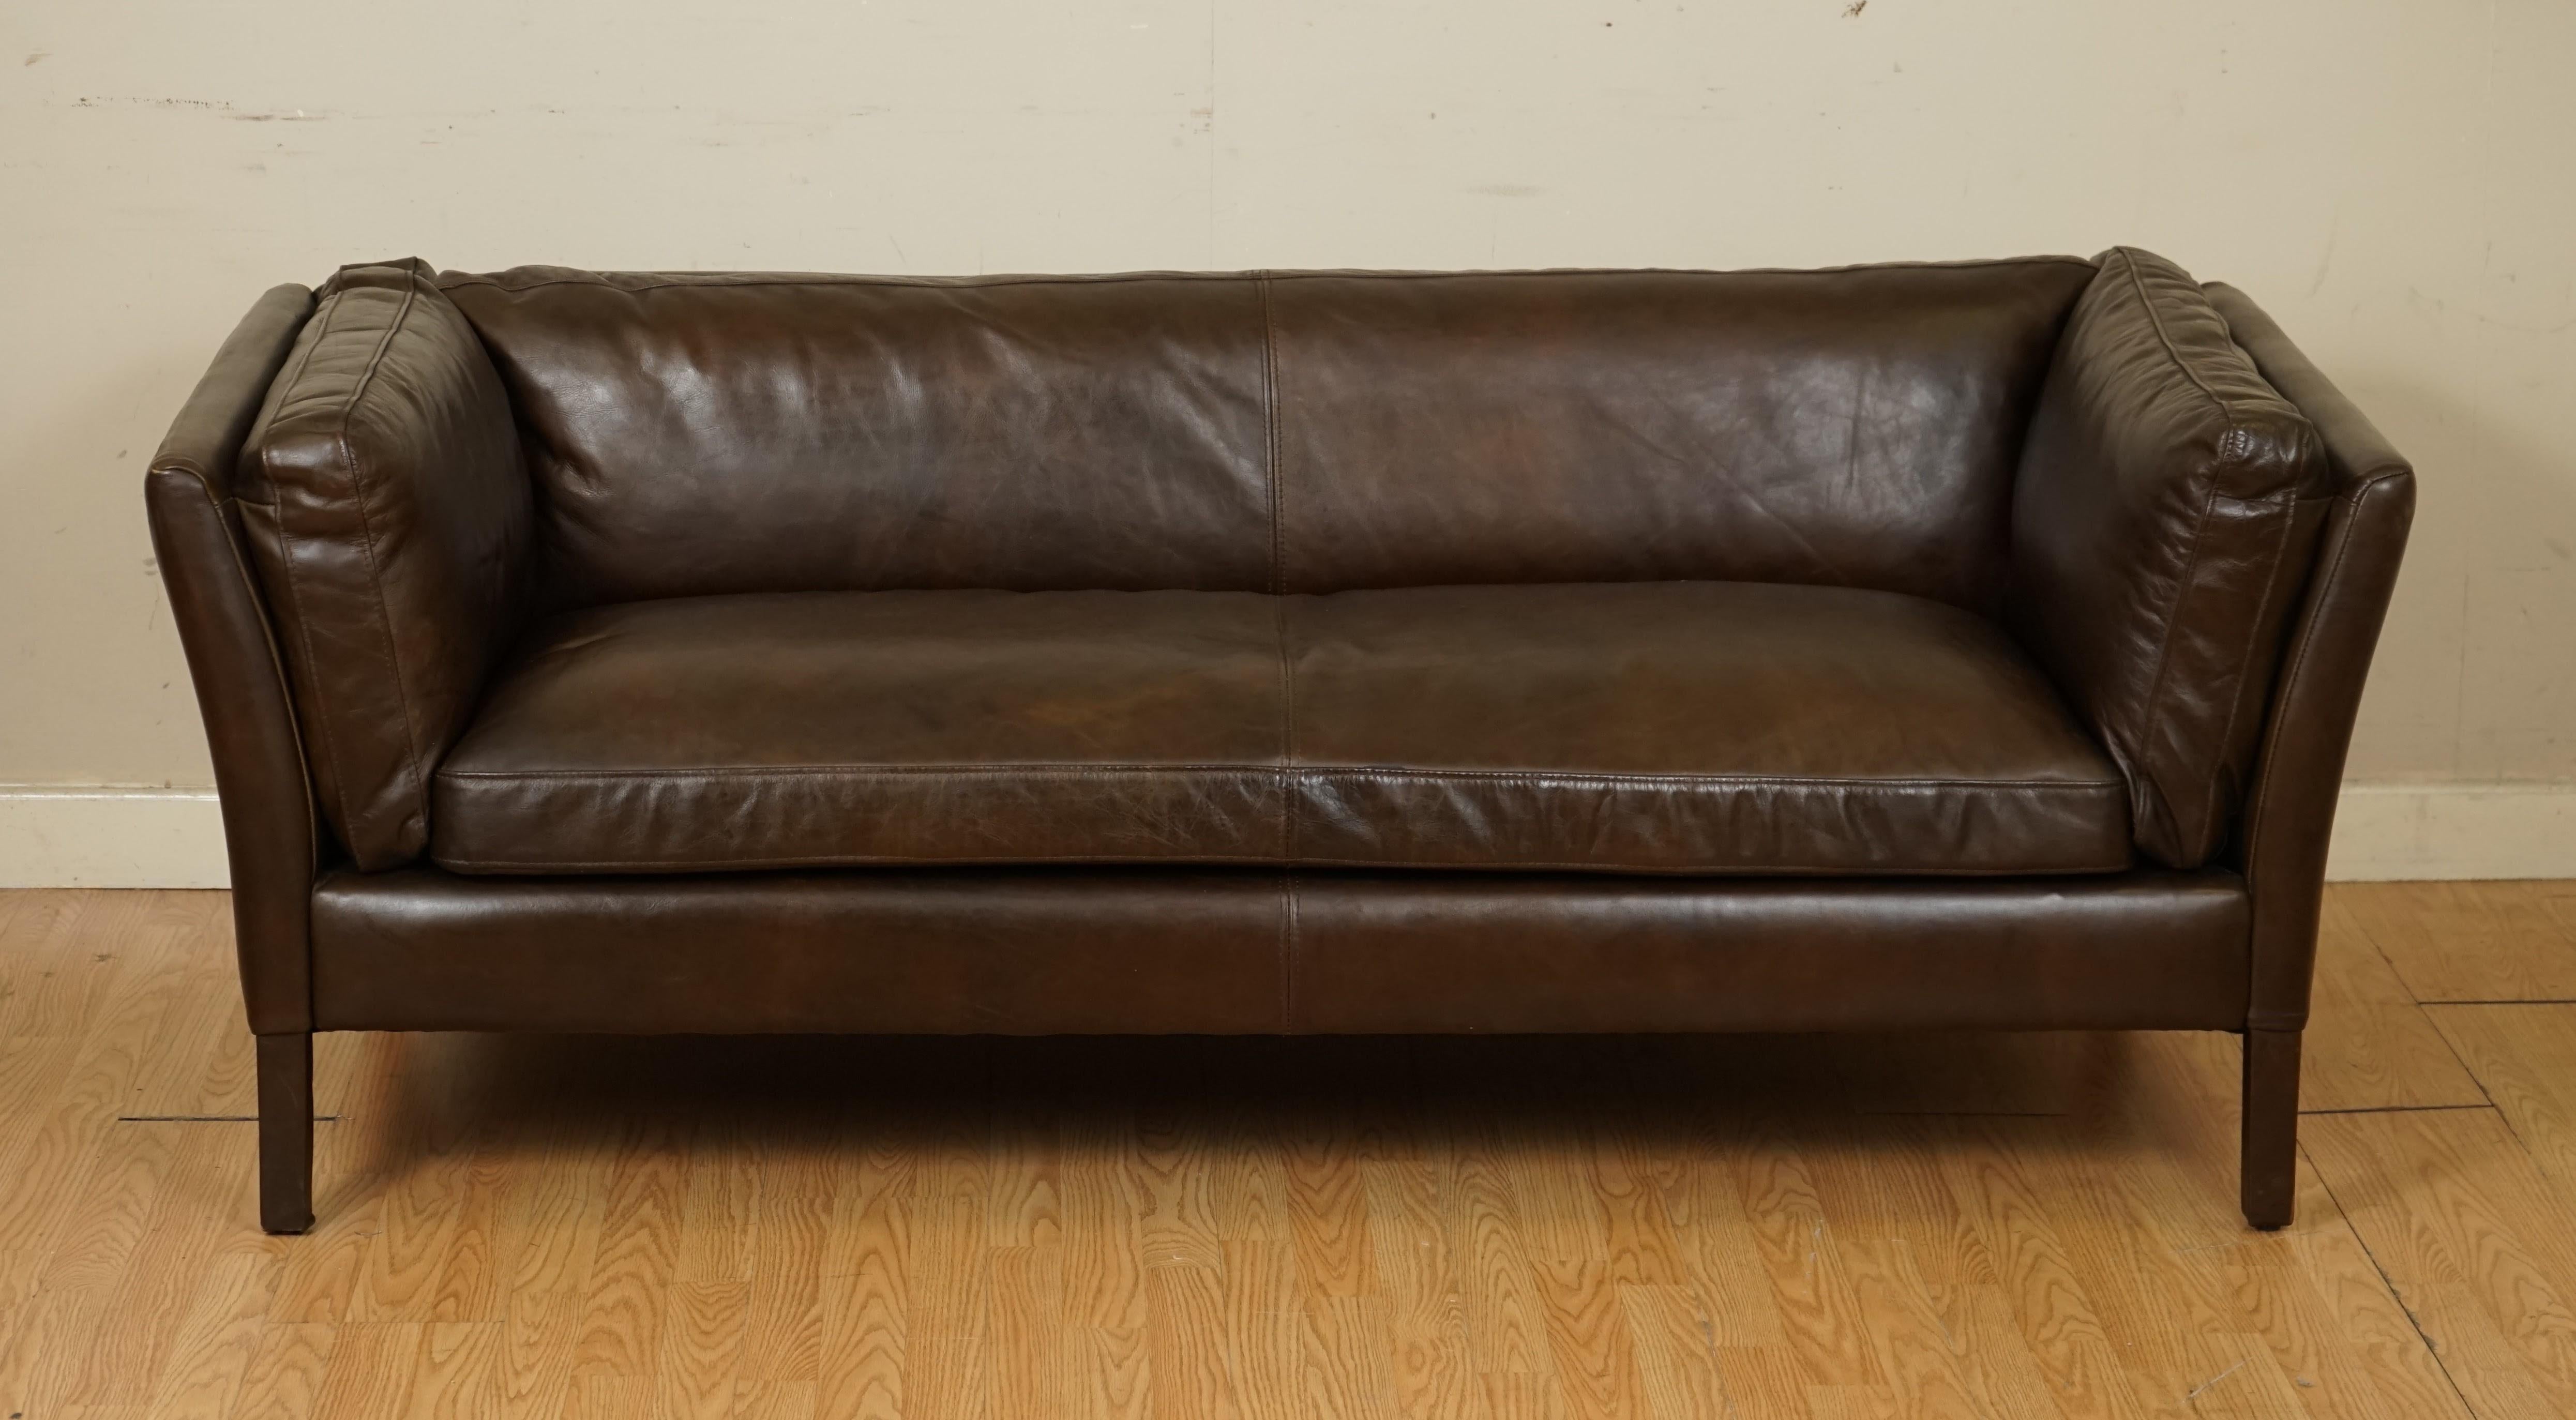 halo groucho sofa review